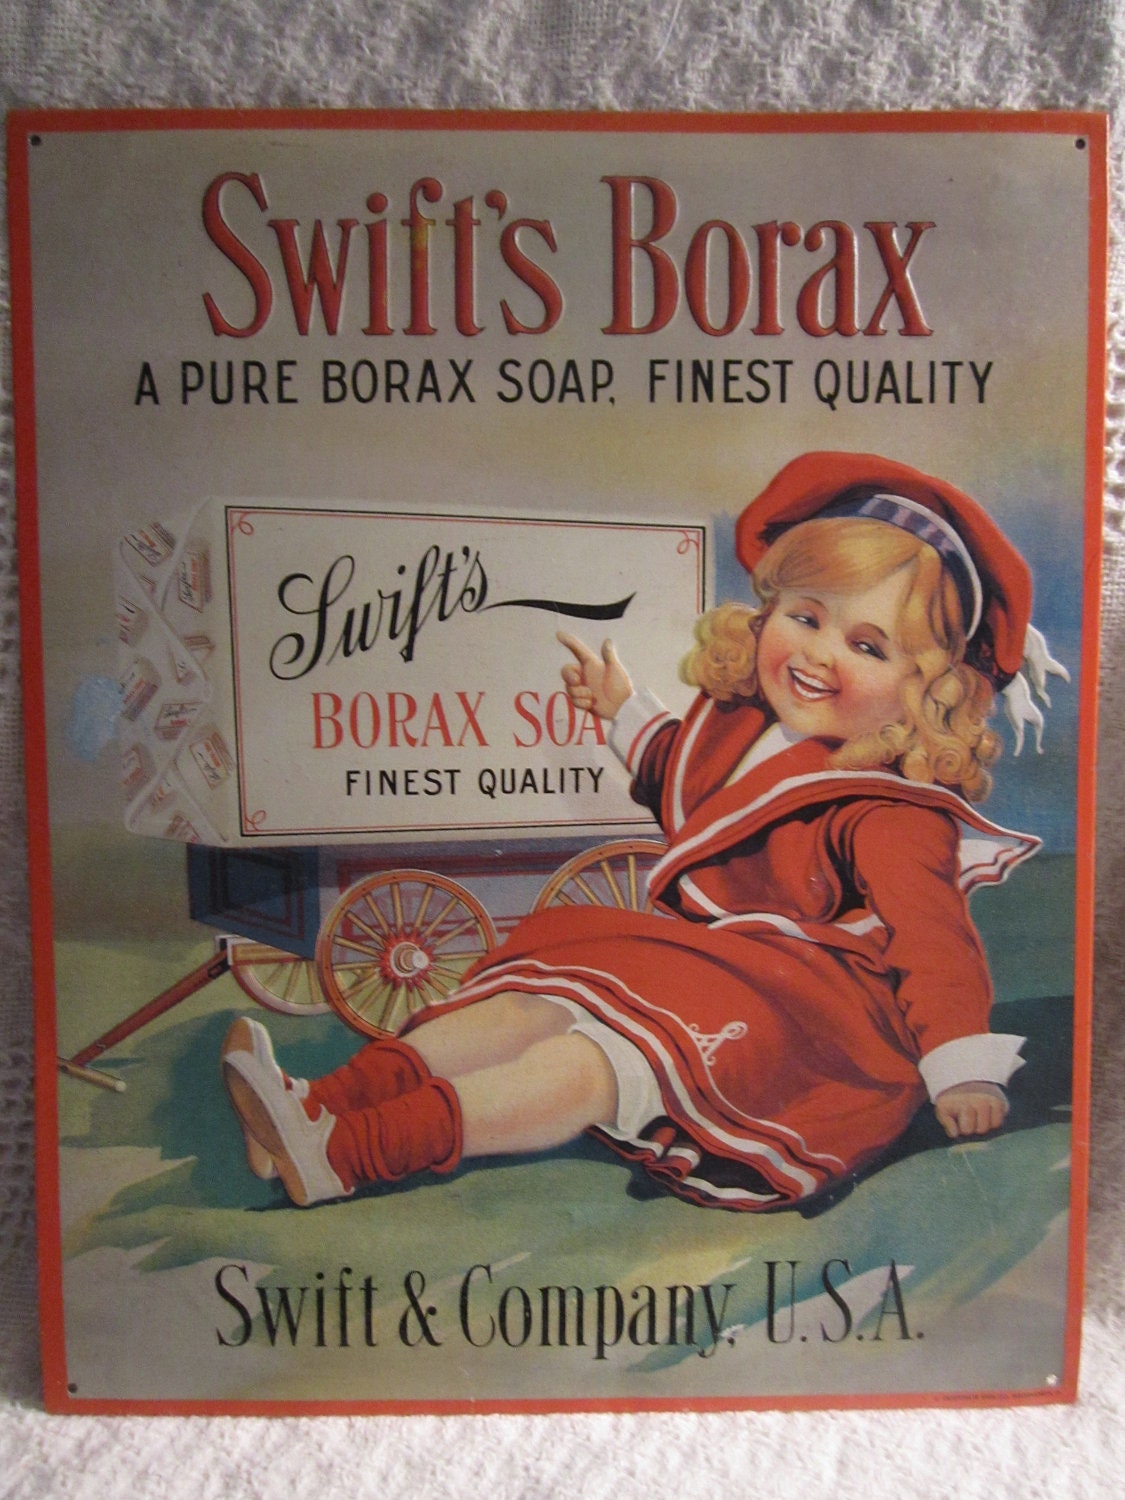 vintage laundry signs for sale